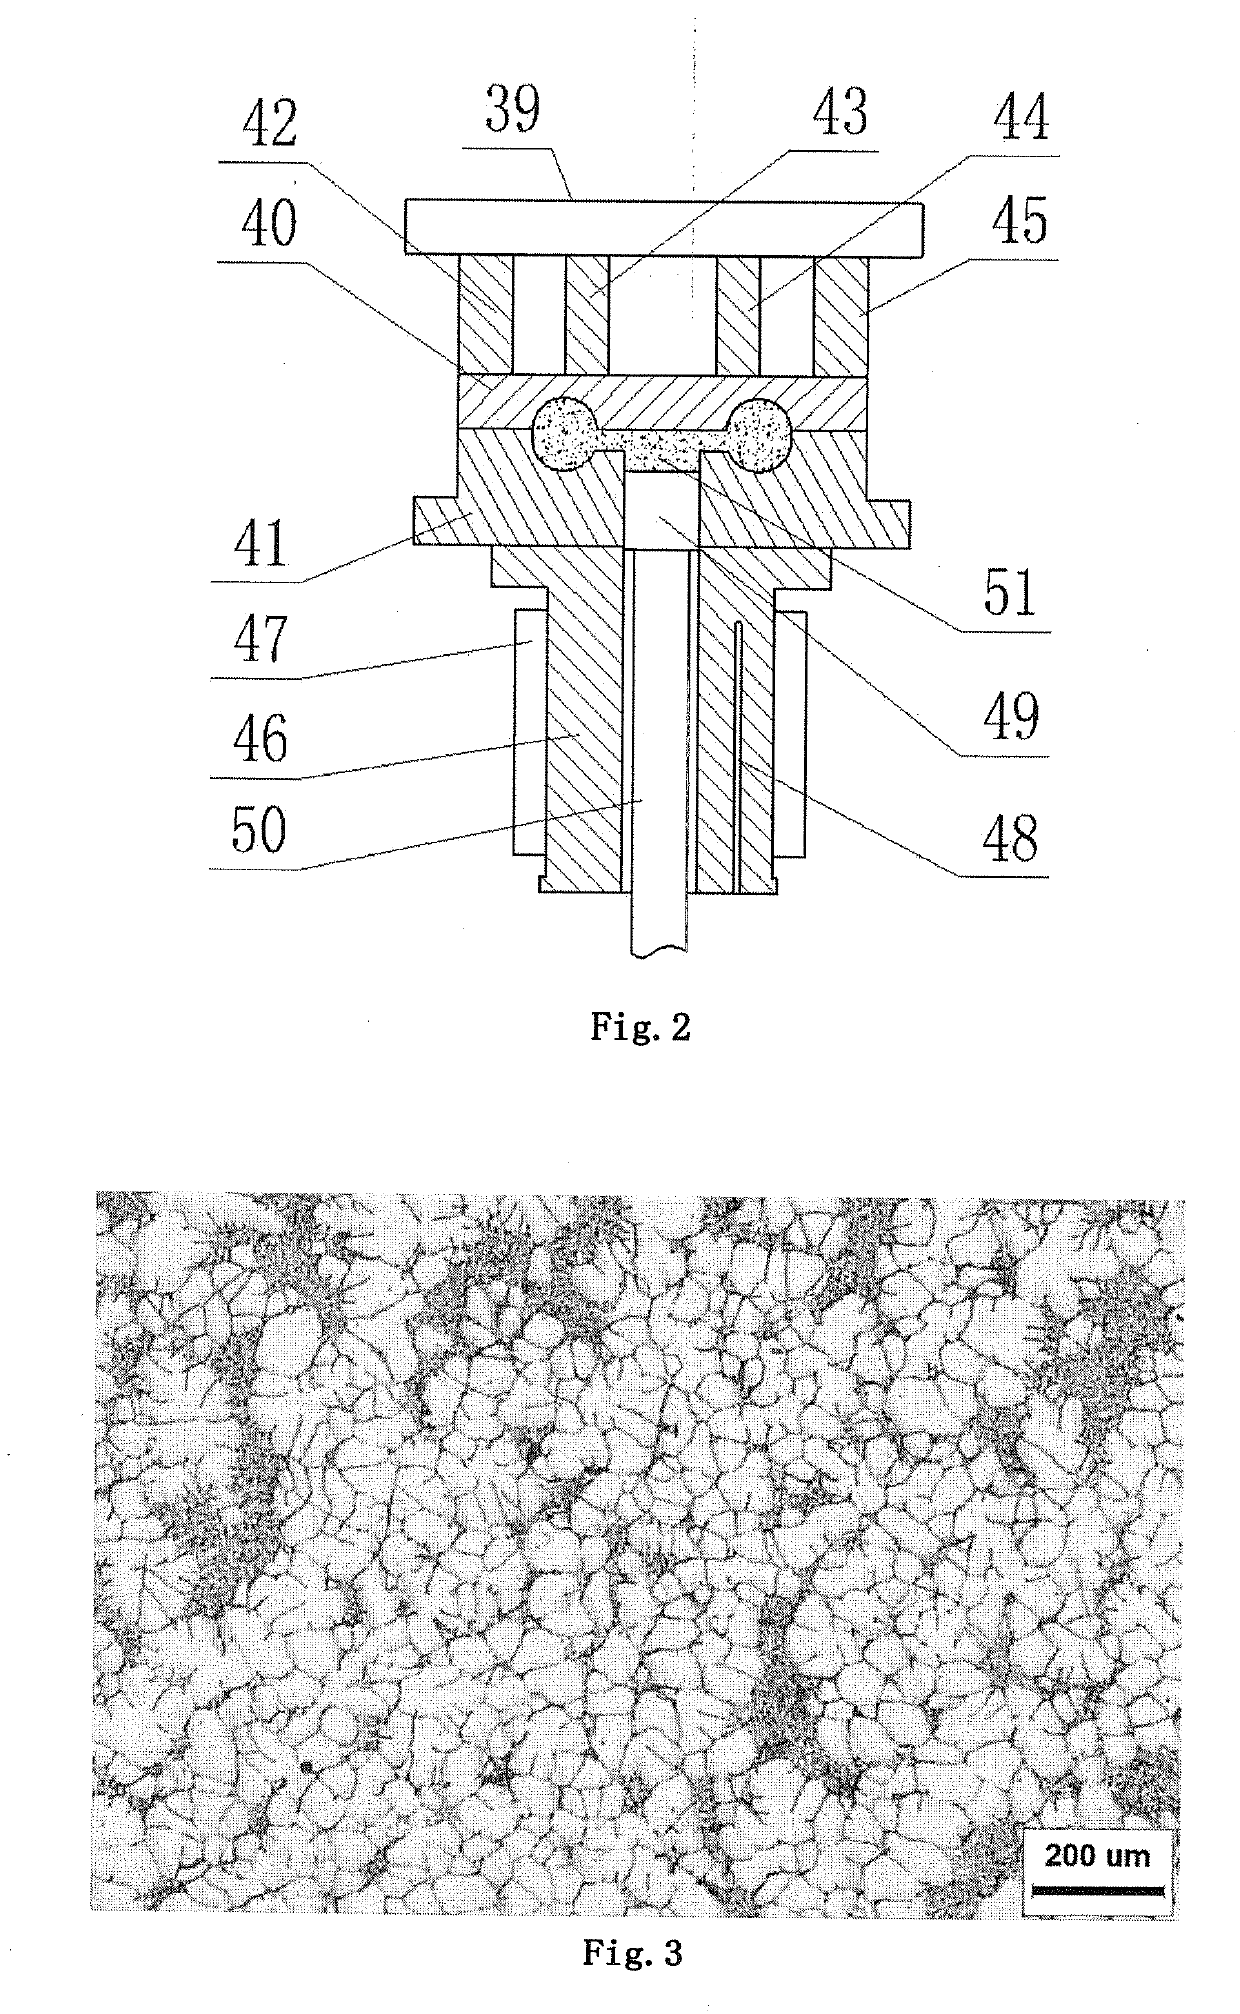 Method of semi-solid indirect squeeze casting for magnesium-based composite material